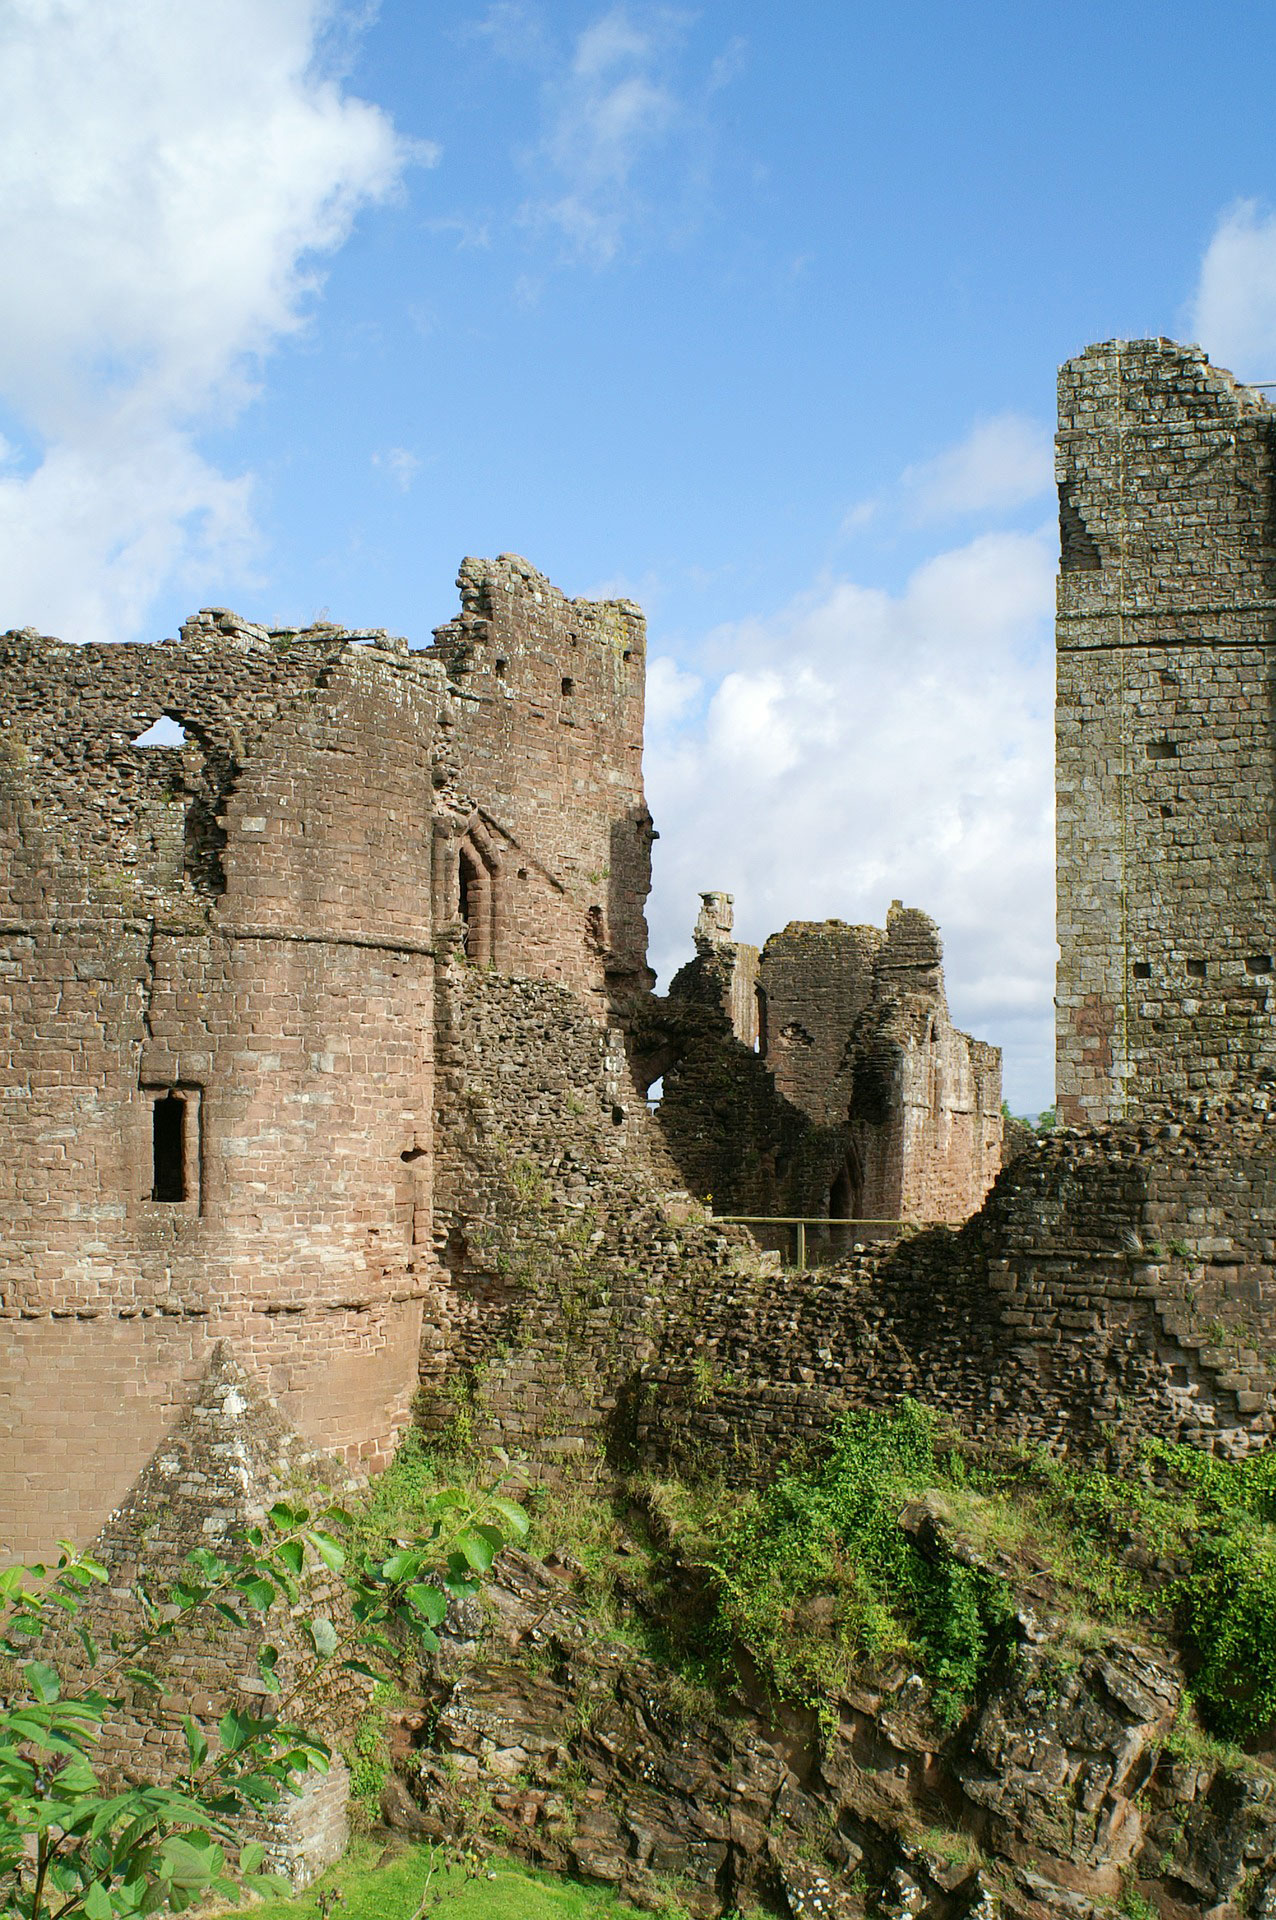 Goodrich Castle, one of the finest medieval castles in England